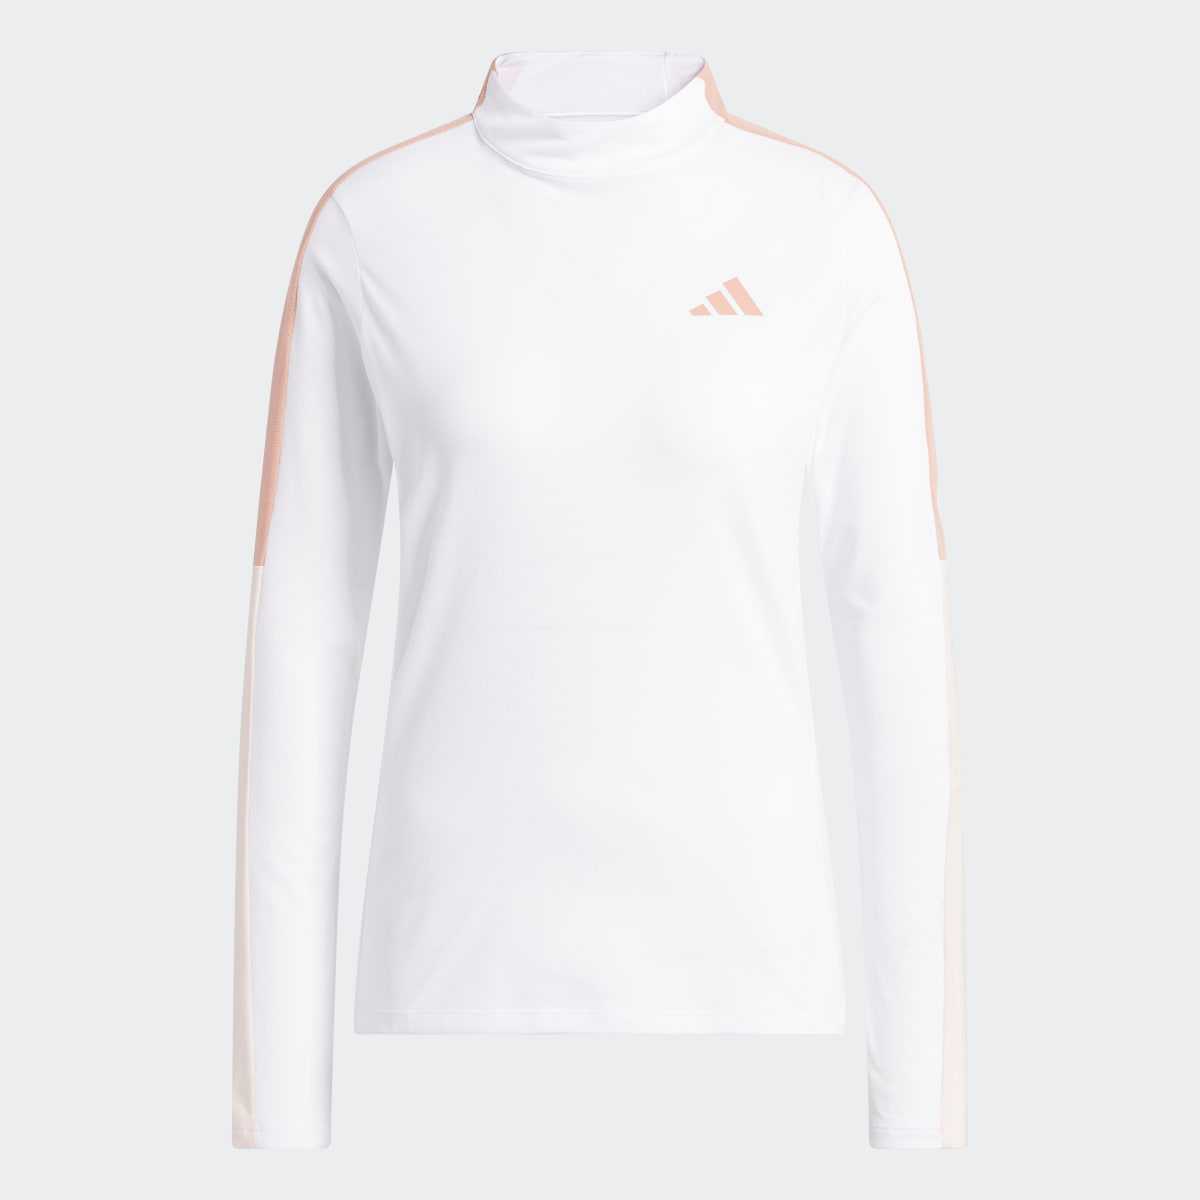 Adidas Made With Nature Mock Neck Tee. 5